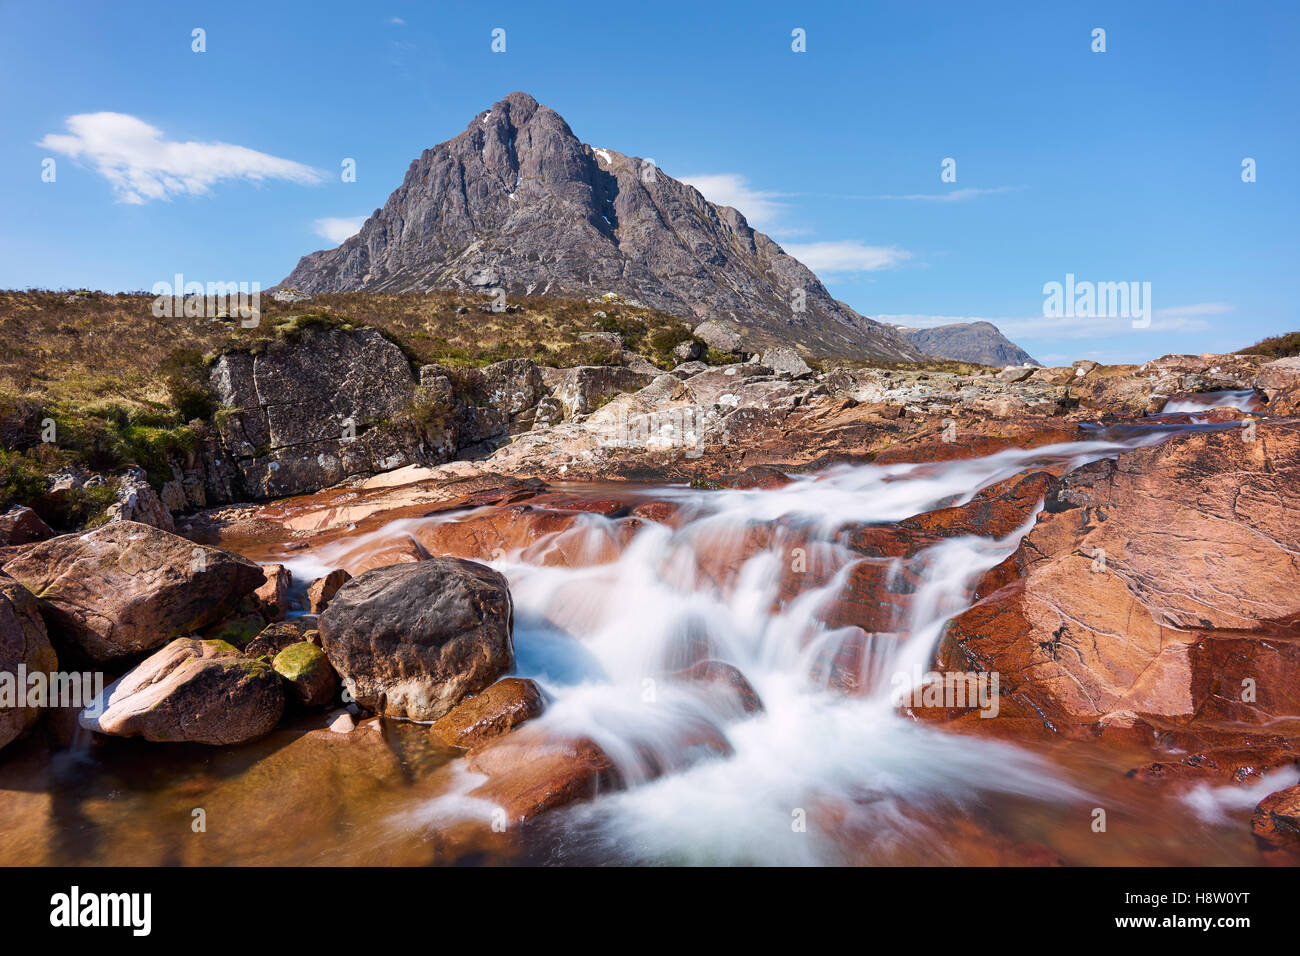 Buachaille Etive Mor and the River Coupall, Scotland.  Mountain and river scenery Stock Photo